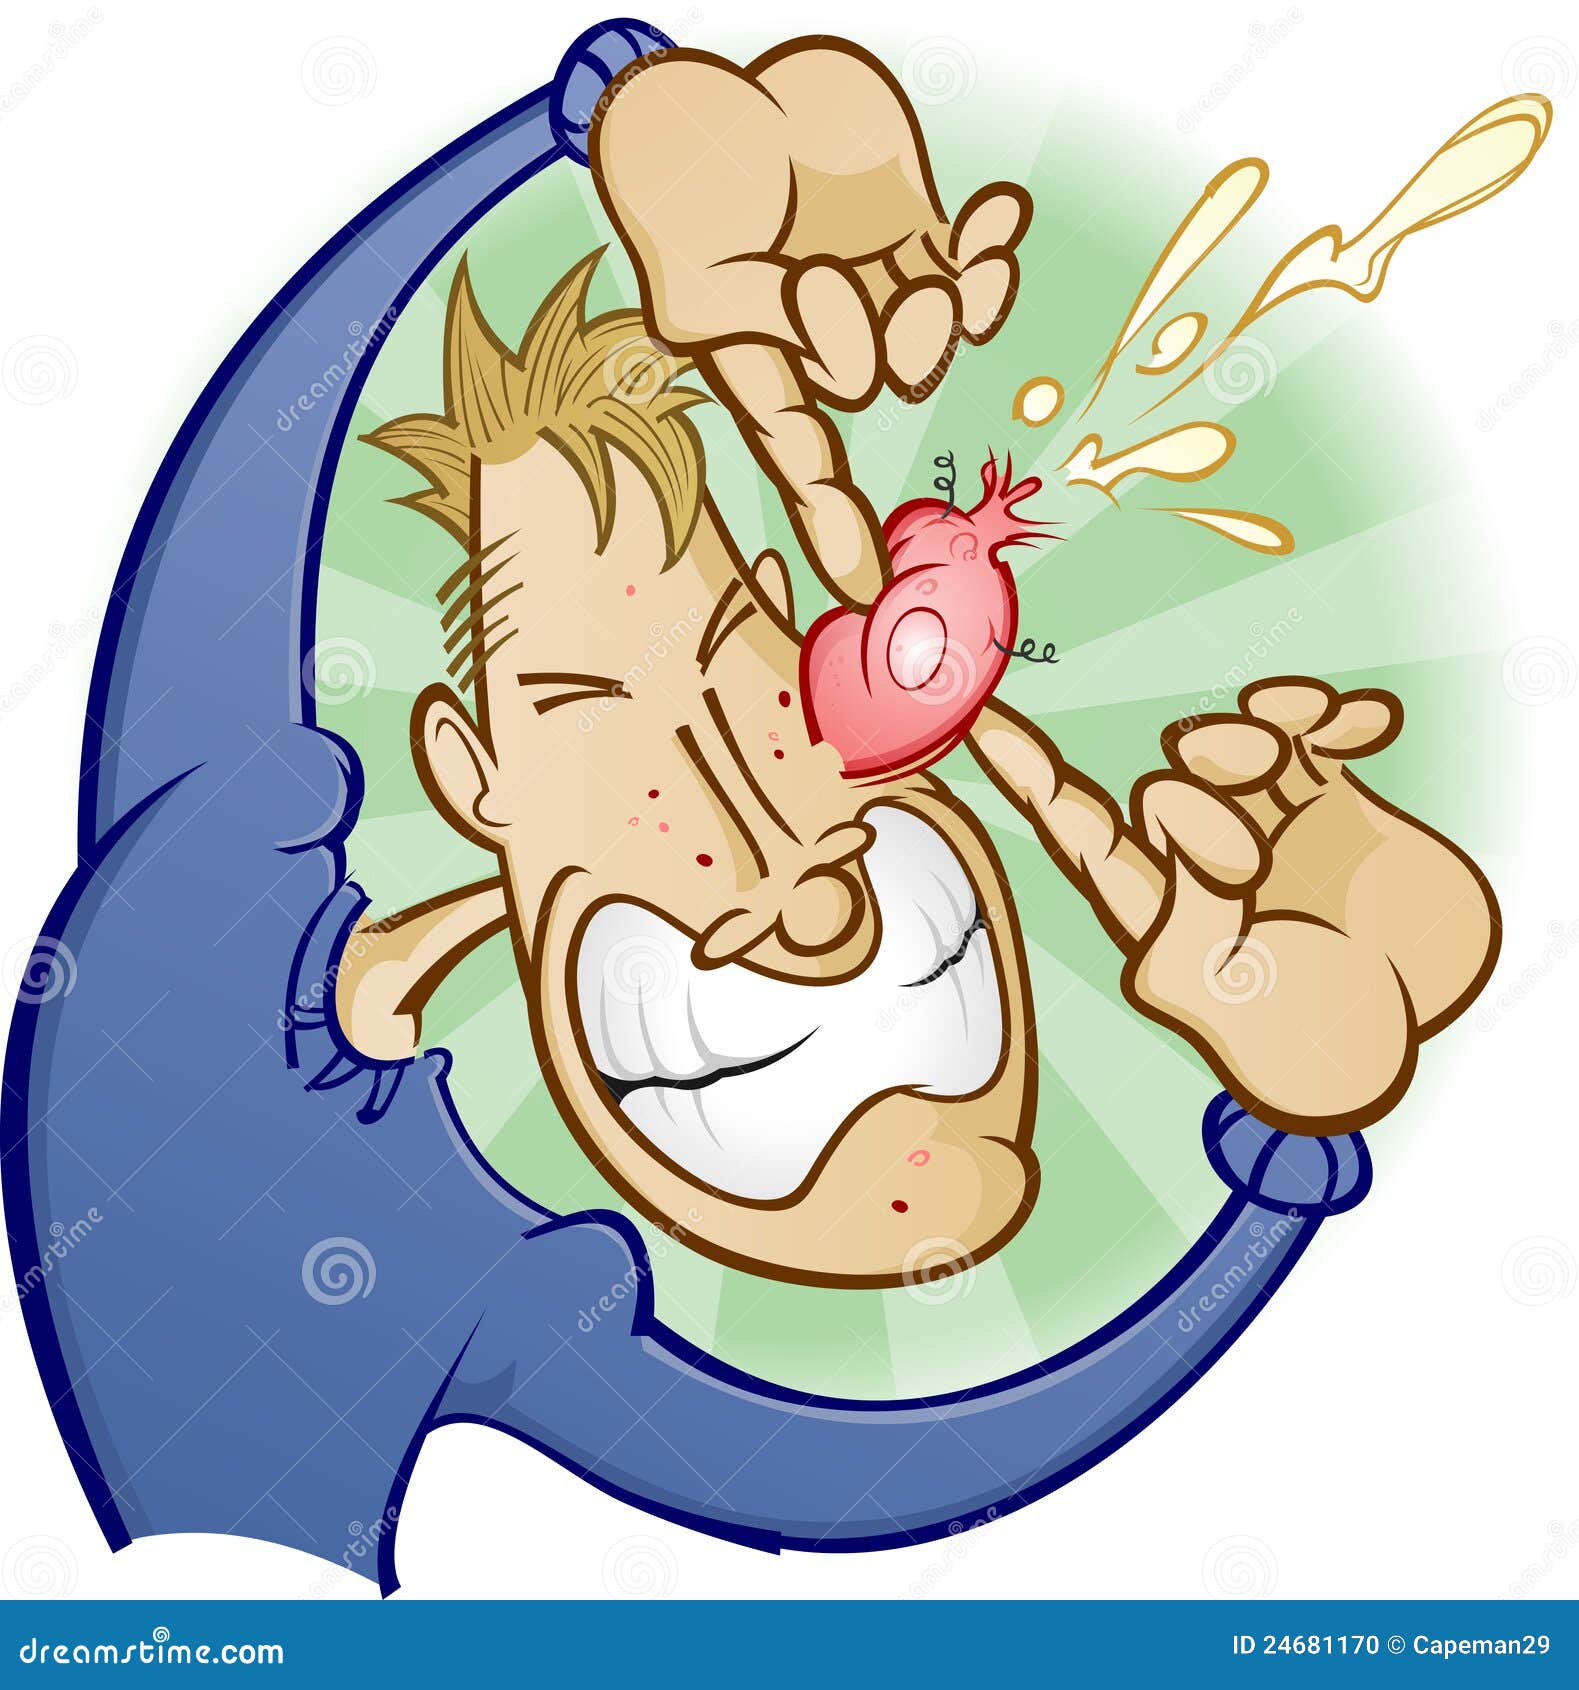 Boy Popping Zit stock vector. Illustration of puss, disgusting - 24681170